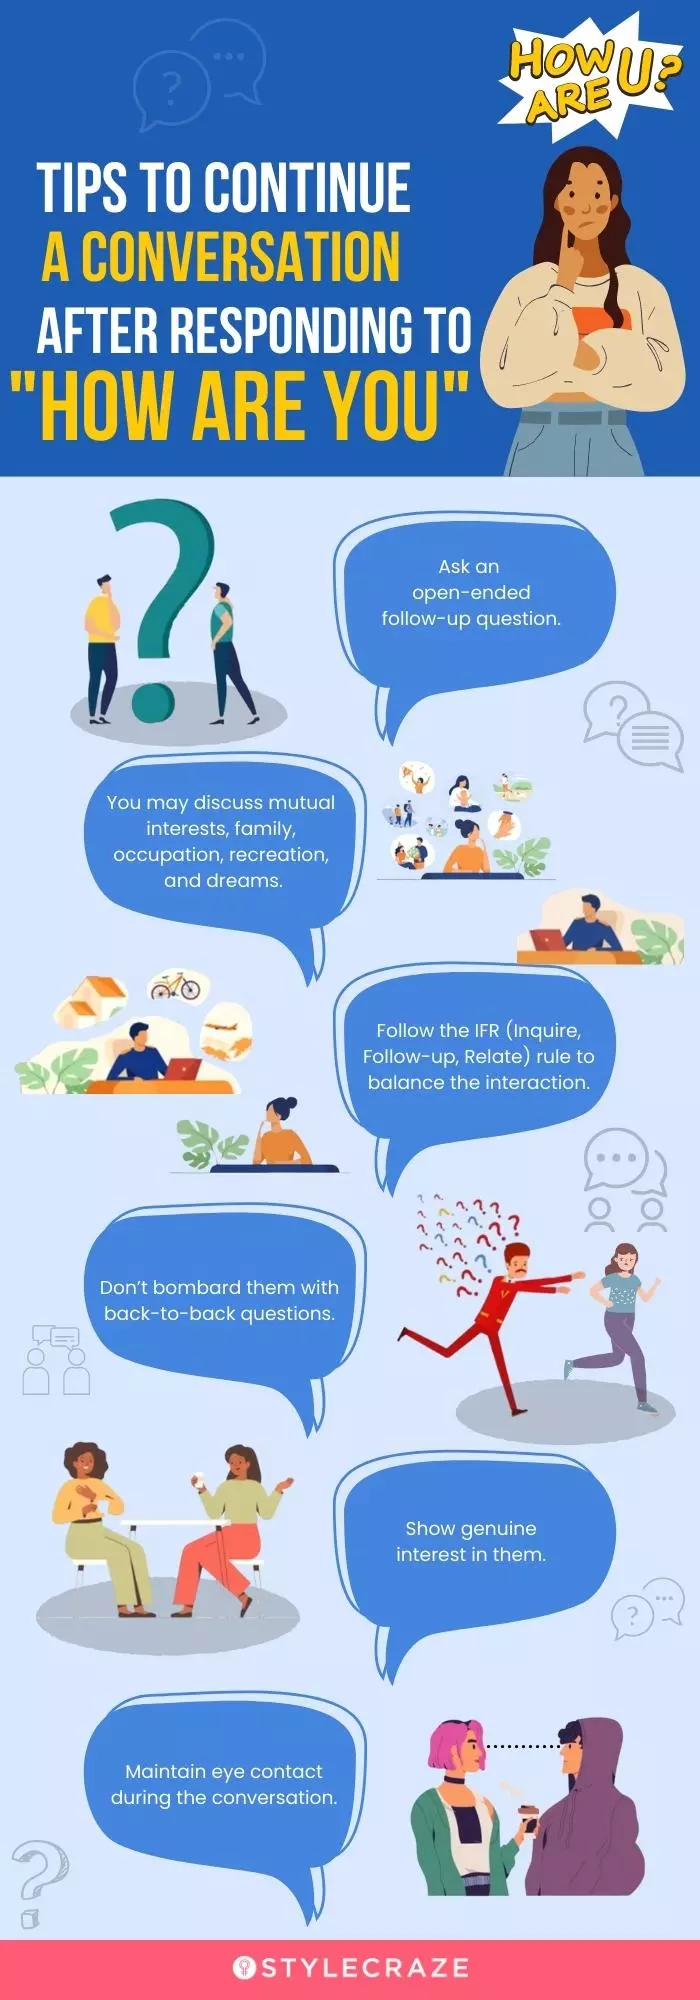 tips to continue a conversation after responding how are you (infographic)